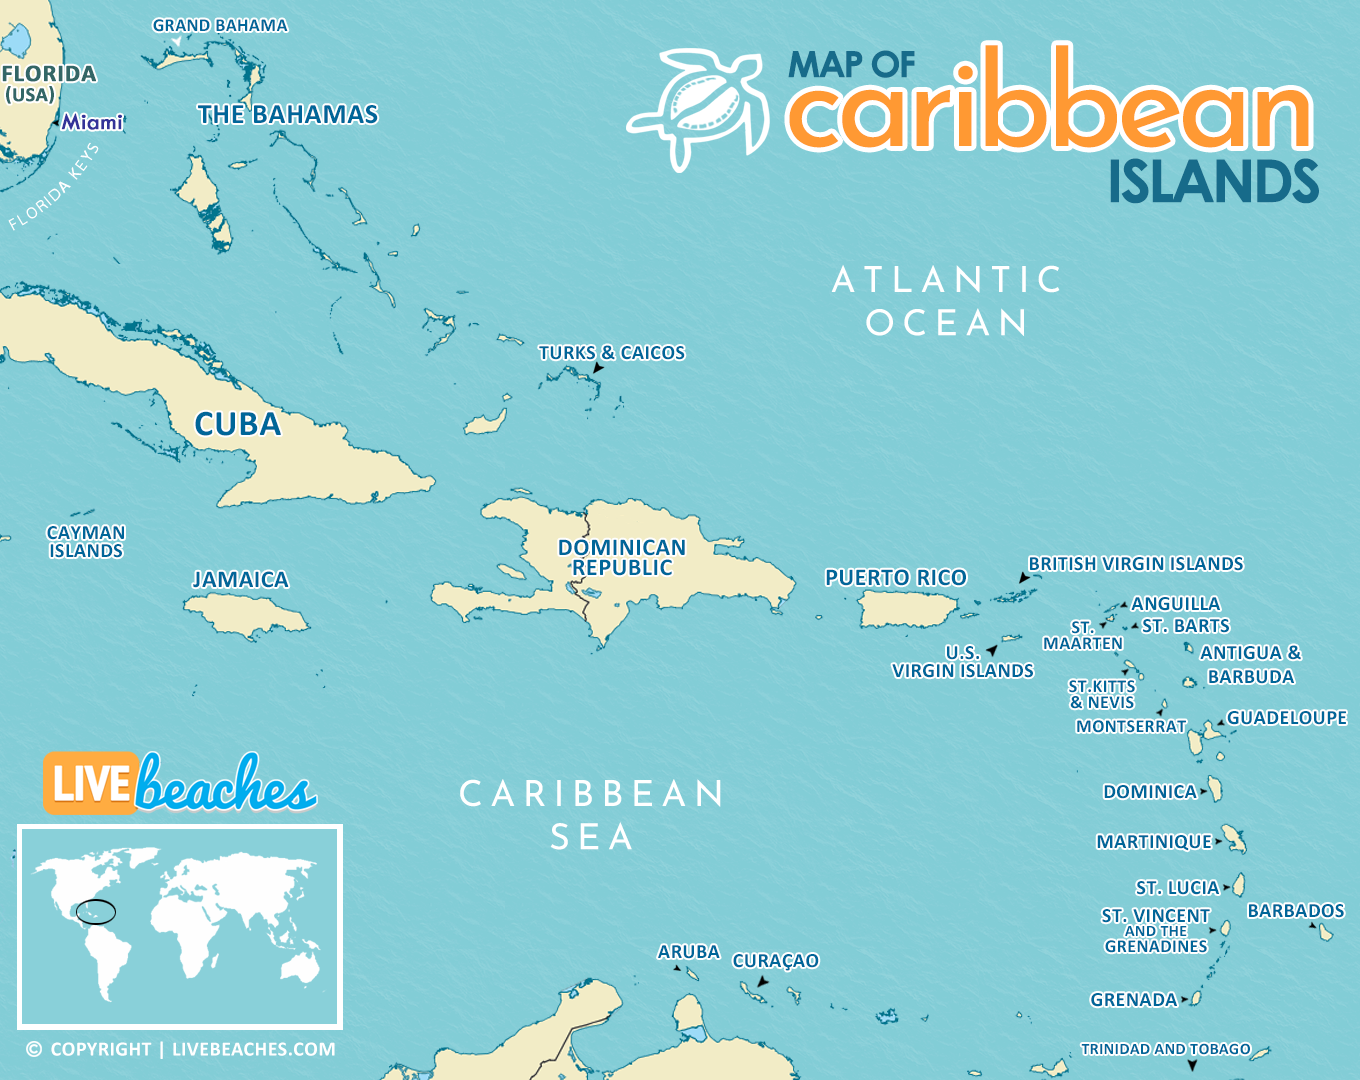 Geography of the Caribbean